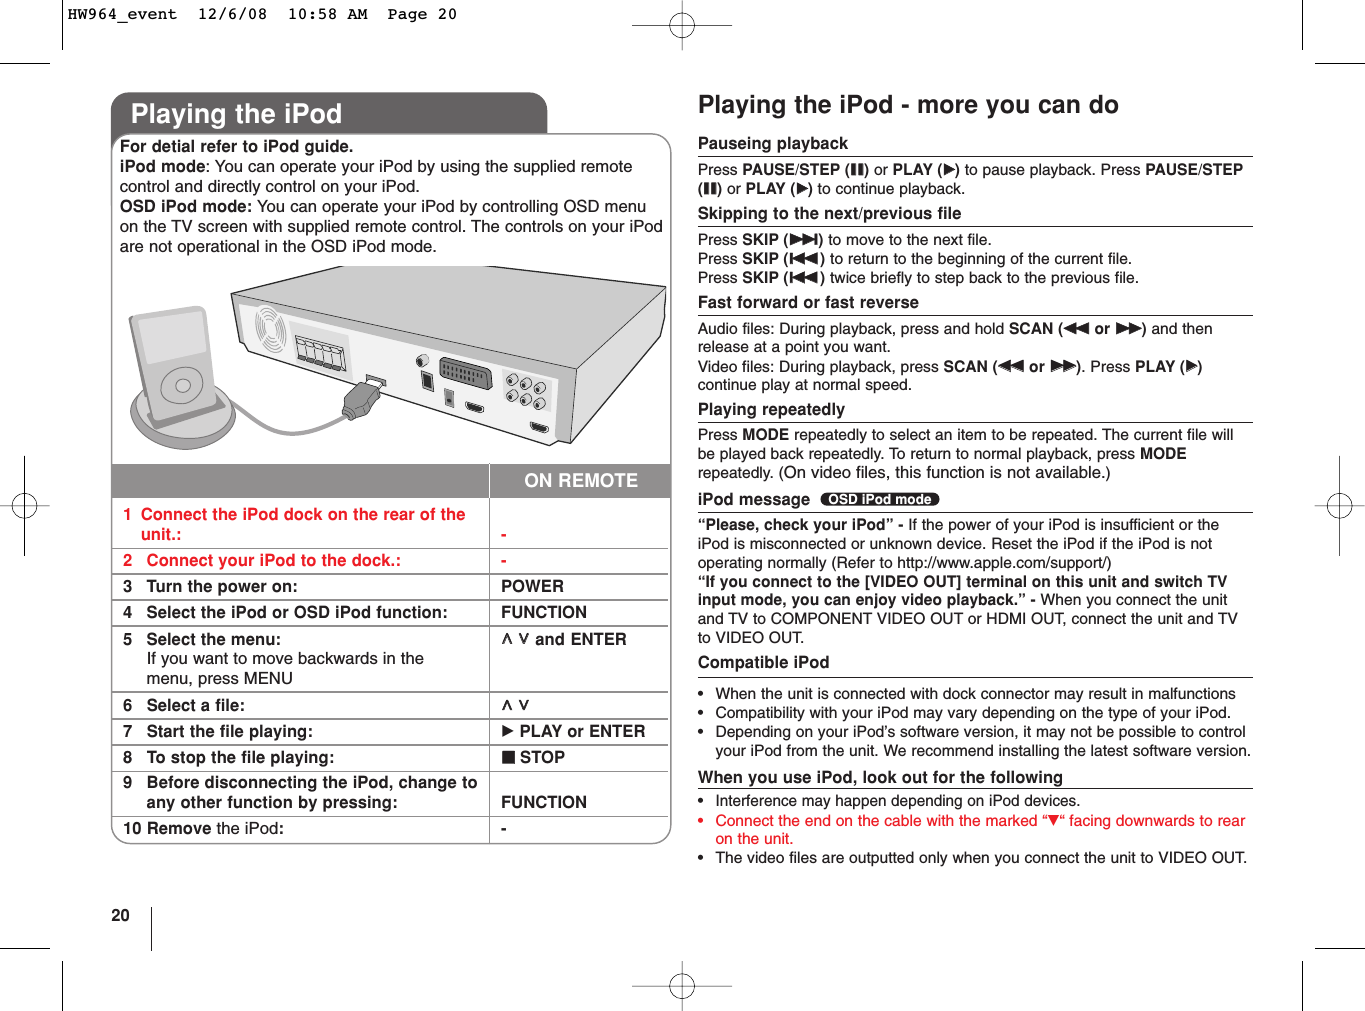 20Playing the iPod - more you can doPauseing playbackPress PAUSE/STEP (XX)or PLAY (BB)to pause playback. Press PAUSE/STEP(XX)or PLAY (BB)to continue playback.Skipping to the next/previous filePress SKIP (&gt;&gt;)to move to the next file.Press SKIP (..)to return to the beginning of the current file. Press SKIP (..)twice briefly to step back to the previous file.Fast forward or fast reverseAudio files: During playback, press and hold SCAN (mmor MM)and thenrelease at a point you want.Video files: During playback, press SCAN (mmor MM). Press PLAY (BB)continue play at normal speed.Playing repeatedlyPress MODE repeatedly to select an item to be repeated. The current file willbe played back repeatedly. To return to normal playback, press MODErepeatedly. (On video files, this function is not available.)iPod message  “Please, check your iPod” - If the power of your iPod is insufficient or theiPod is misconnected or unknown device. Reset the iPod if the iPod is notoperating normally (Refer to http://www.apple.com/support/)“If you connect to the [VIDEO OUT] terminal on this unit and switch TVinput mode, you can enjoy video playback.” - When you connect the unitand TV to COMPONENT VIDEO OUT or HDMI OUT, connect the unit and TVto VIDEO OUT.Compatible iPod•When the unit is connected with dock connector may result in malfunctions•Compatibility with your iPod may vary depending on the type of your iPod. •Depending on your iPod’s software version, it may not be possible to controlyour iPod from the unit. We recommend installing the latest software version.When you use iPod, look out for the following•Interference may happen depending on iPod devices.•Connect the end on the cable with the marked “V“ facing downwards to rearon the unit.•The video files are outputted only when you connect the unit to VIDEO OUT.OSD iPod modePlaying the iPod1Connect the iPod dock on the rear of the unit.: -2Connect your iPod to the dock.: -3Turn the power on:  POWER4Select the iPod or OSD iPod function:  FUNCTION5Select the menu: UU  uuand ENTERIf you want to move backwards in the menu, press MENU6Select a file: UU  uu7Start the file playing: BPLAY or ENTER8To stop the file playing: xxSTOP9Before disconnecting the iPod, change to any other function by pressing: FUNCTION10 Remove the iPod:-For detial refer to iPod guide.iPod mode: You can operate your iPod by using the supplied remotecontrol and directly control on your iPod.OSD iPod mode: You can operate your iPod by controlling OSD menuon the TV screen with supplied remote control. The controls on your iPodare not operational in the OSD iPod mode.ON REMOTEHW964_event  12/6/08  10:58 AM  Page 20